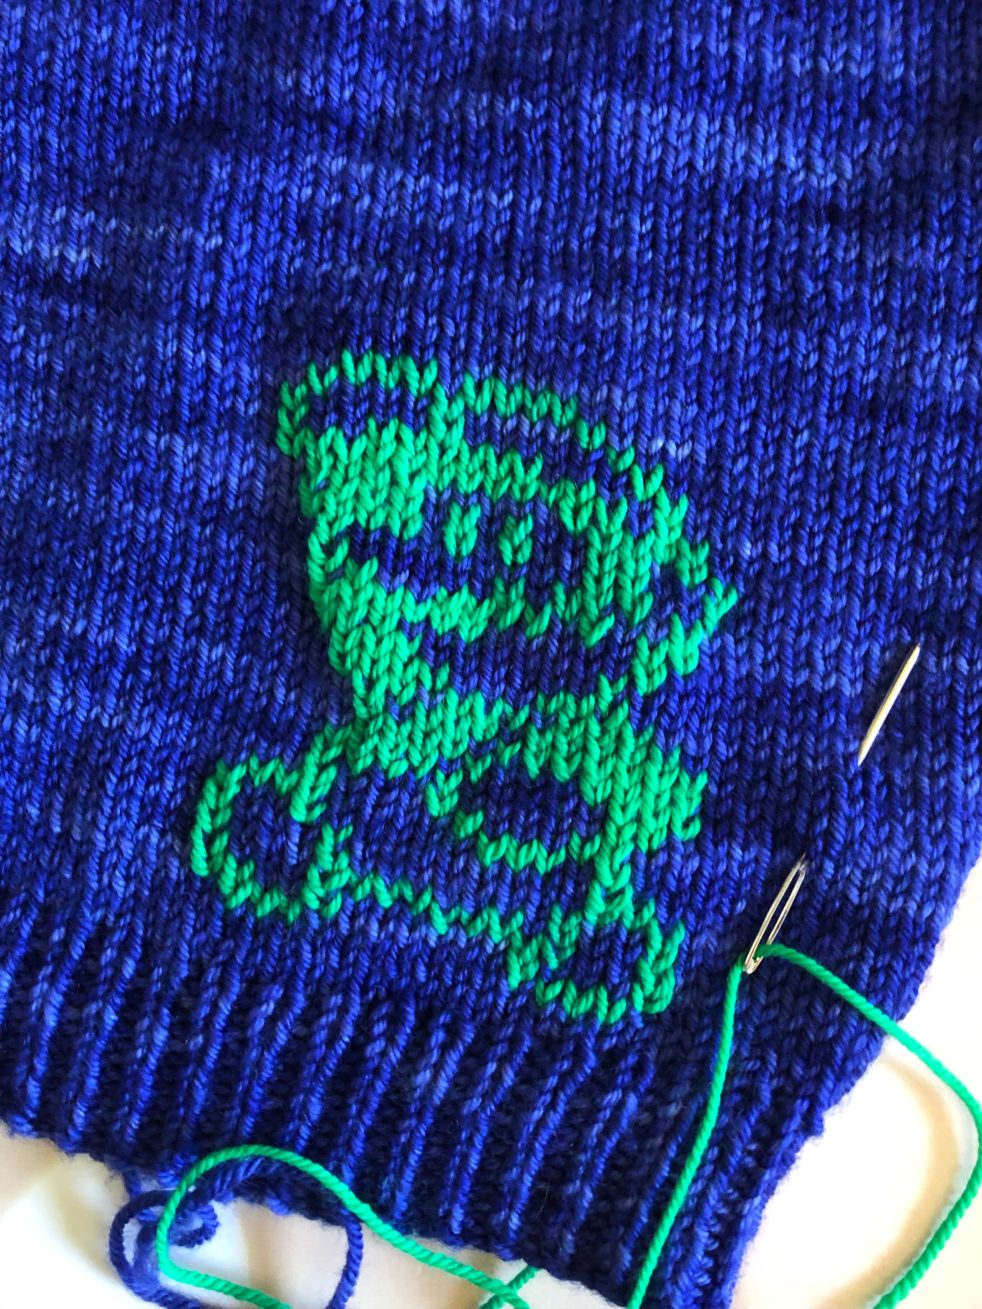 A photo of the hem of a royal blue sweater. Luigi of Super Mario Brothers has been duplicate stitched onto the sweater in bright green yarn. A needle threaded with green yarn is tucked into the stitches for more embroidery to come.